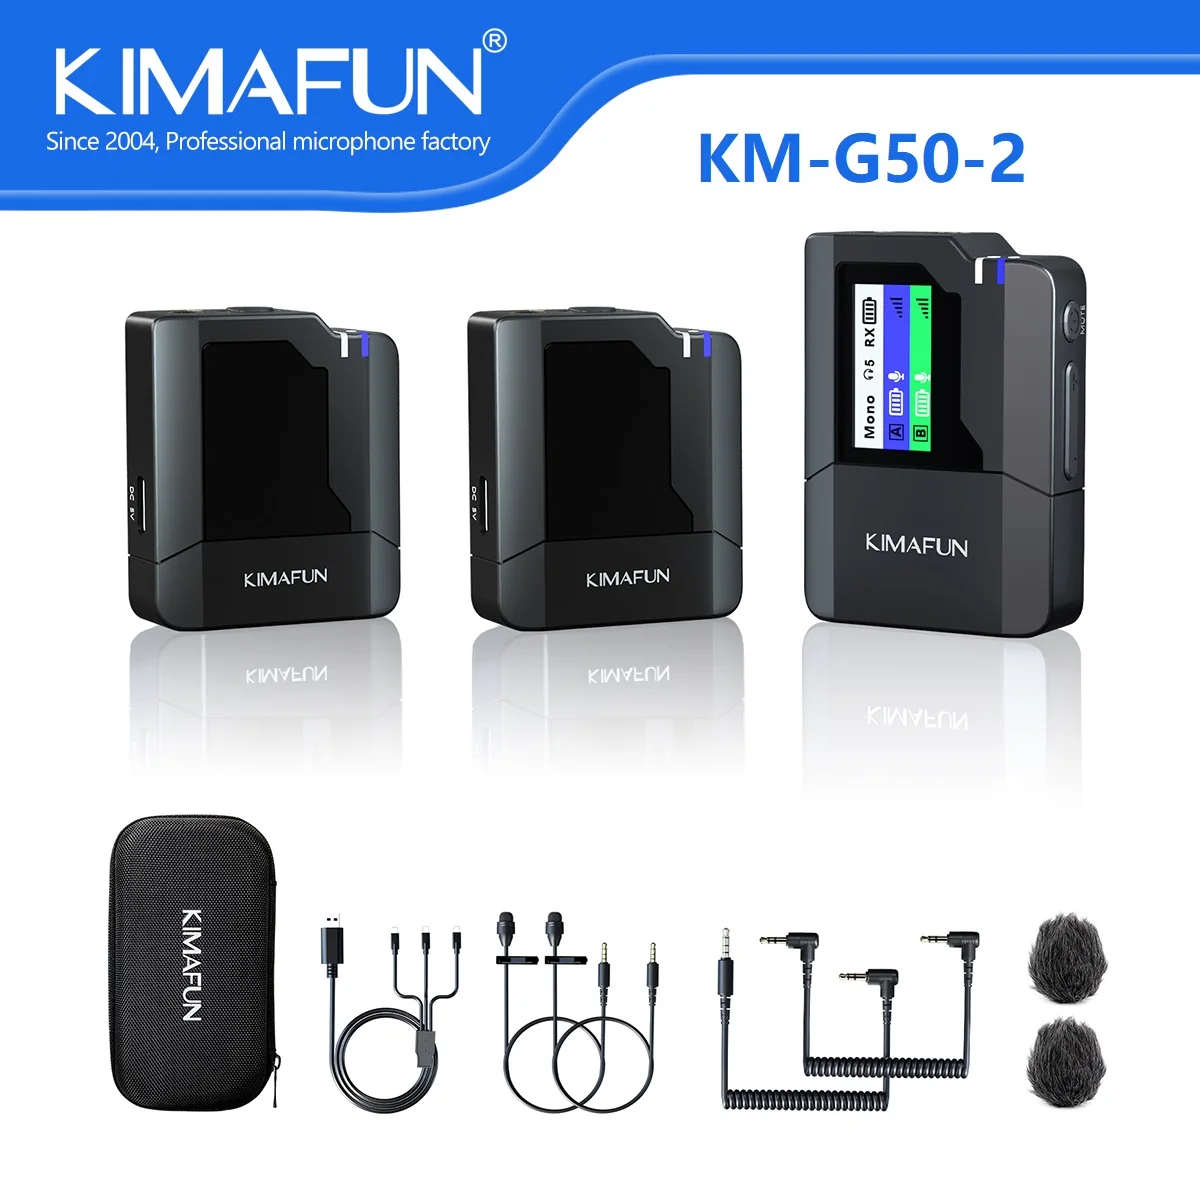 

KIMAFUN Wireless Microphone System Dual Lavalier Lapel for iPhone Android Smartphone Camera TikTok YouTube Facebook Live Stream